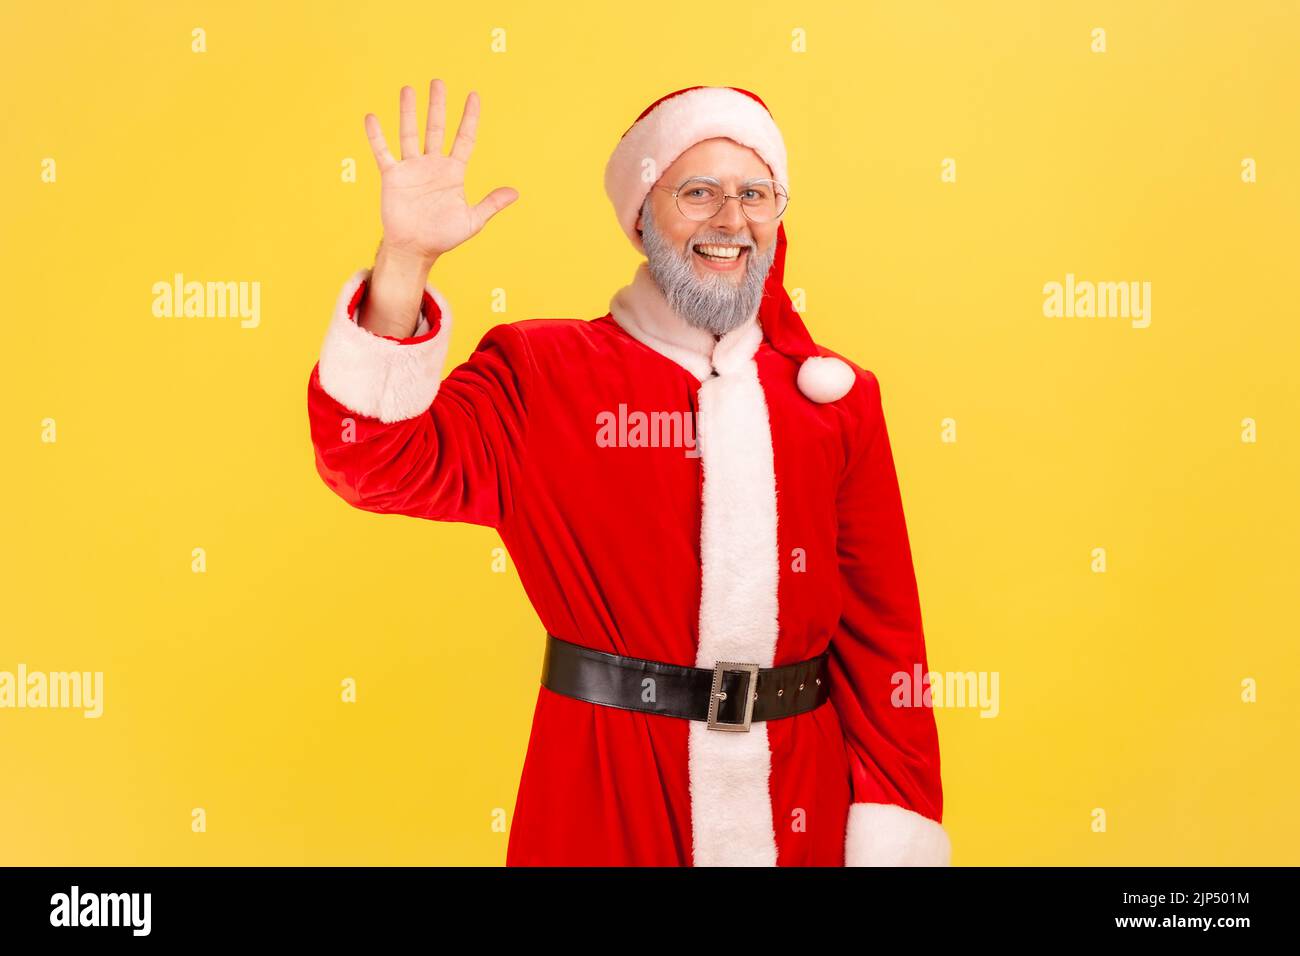 Positive good looking elderly man with gray beard wearing santa claus costume waving hand, greeting somebody, looking at camera with smile. Indoor studio shot isolated on yellow background. Stock Photo